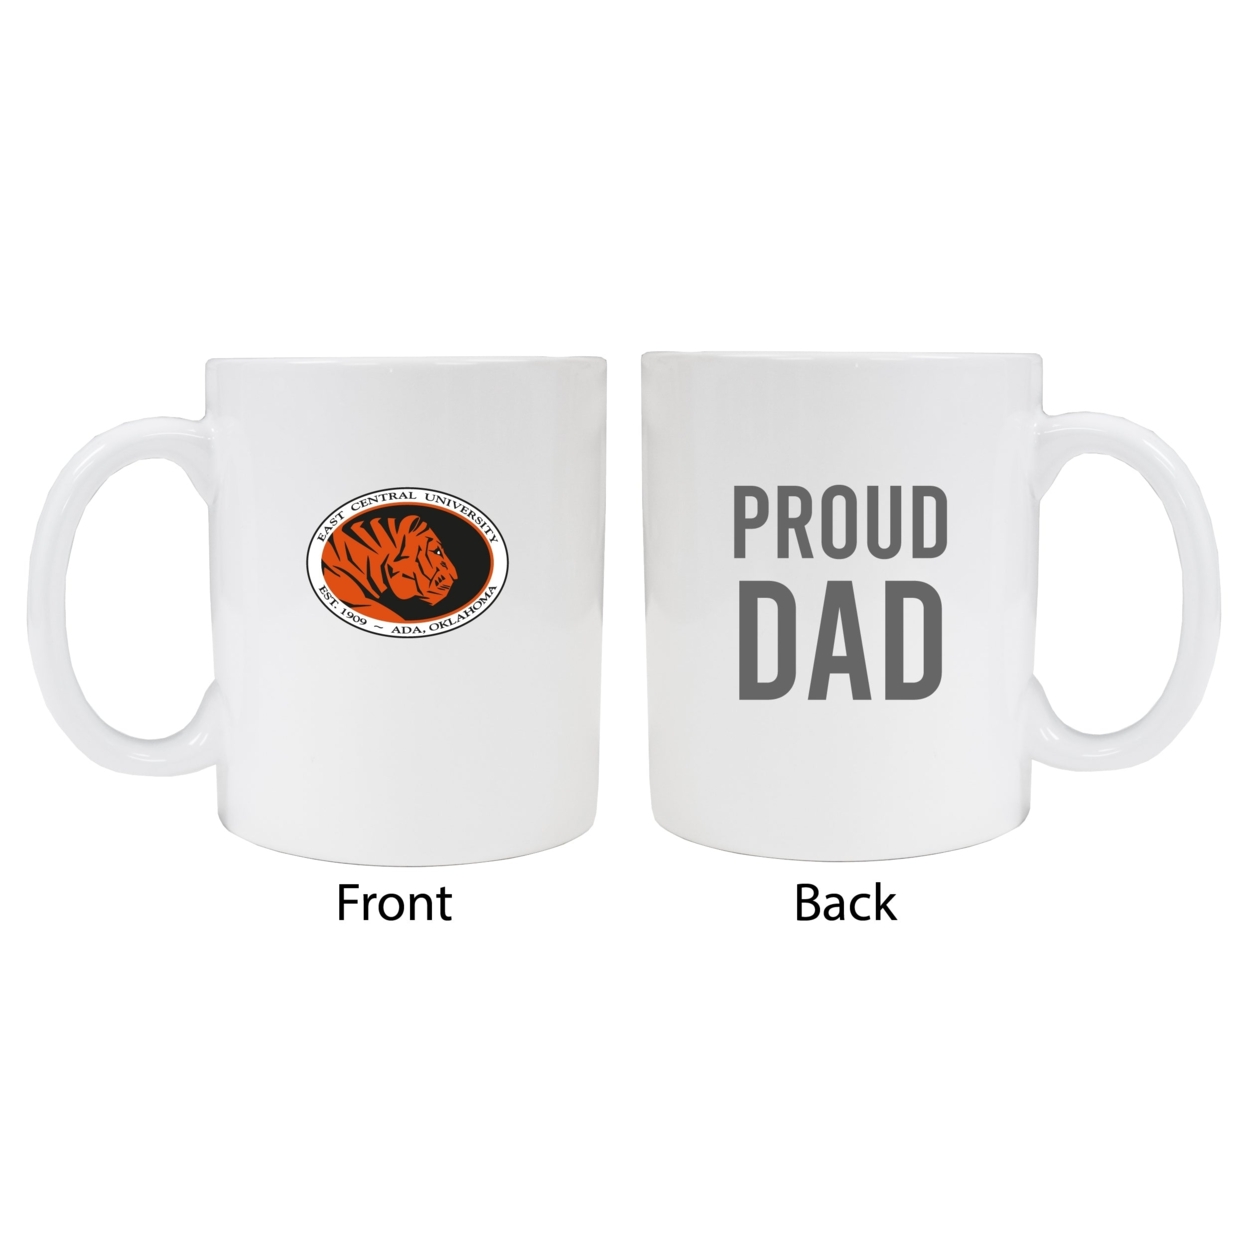 East Central University Tigers Proud Dad Ceramic Coffee Mug - White (2 Pack)